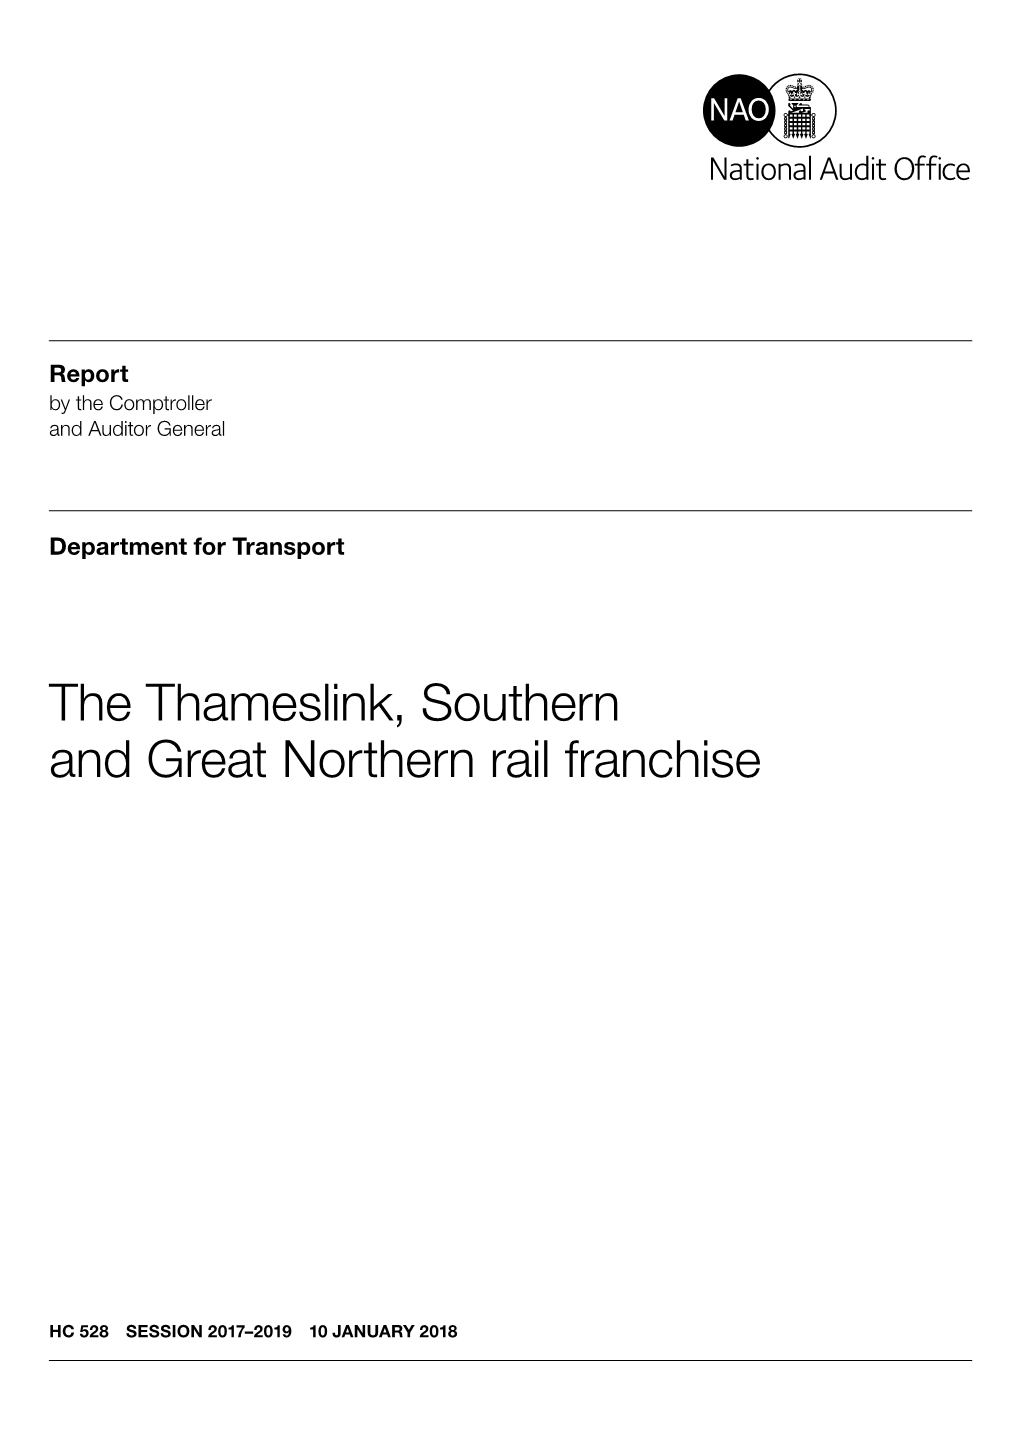 The Thameslink Southern and Great Northern Rail Franchise